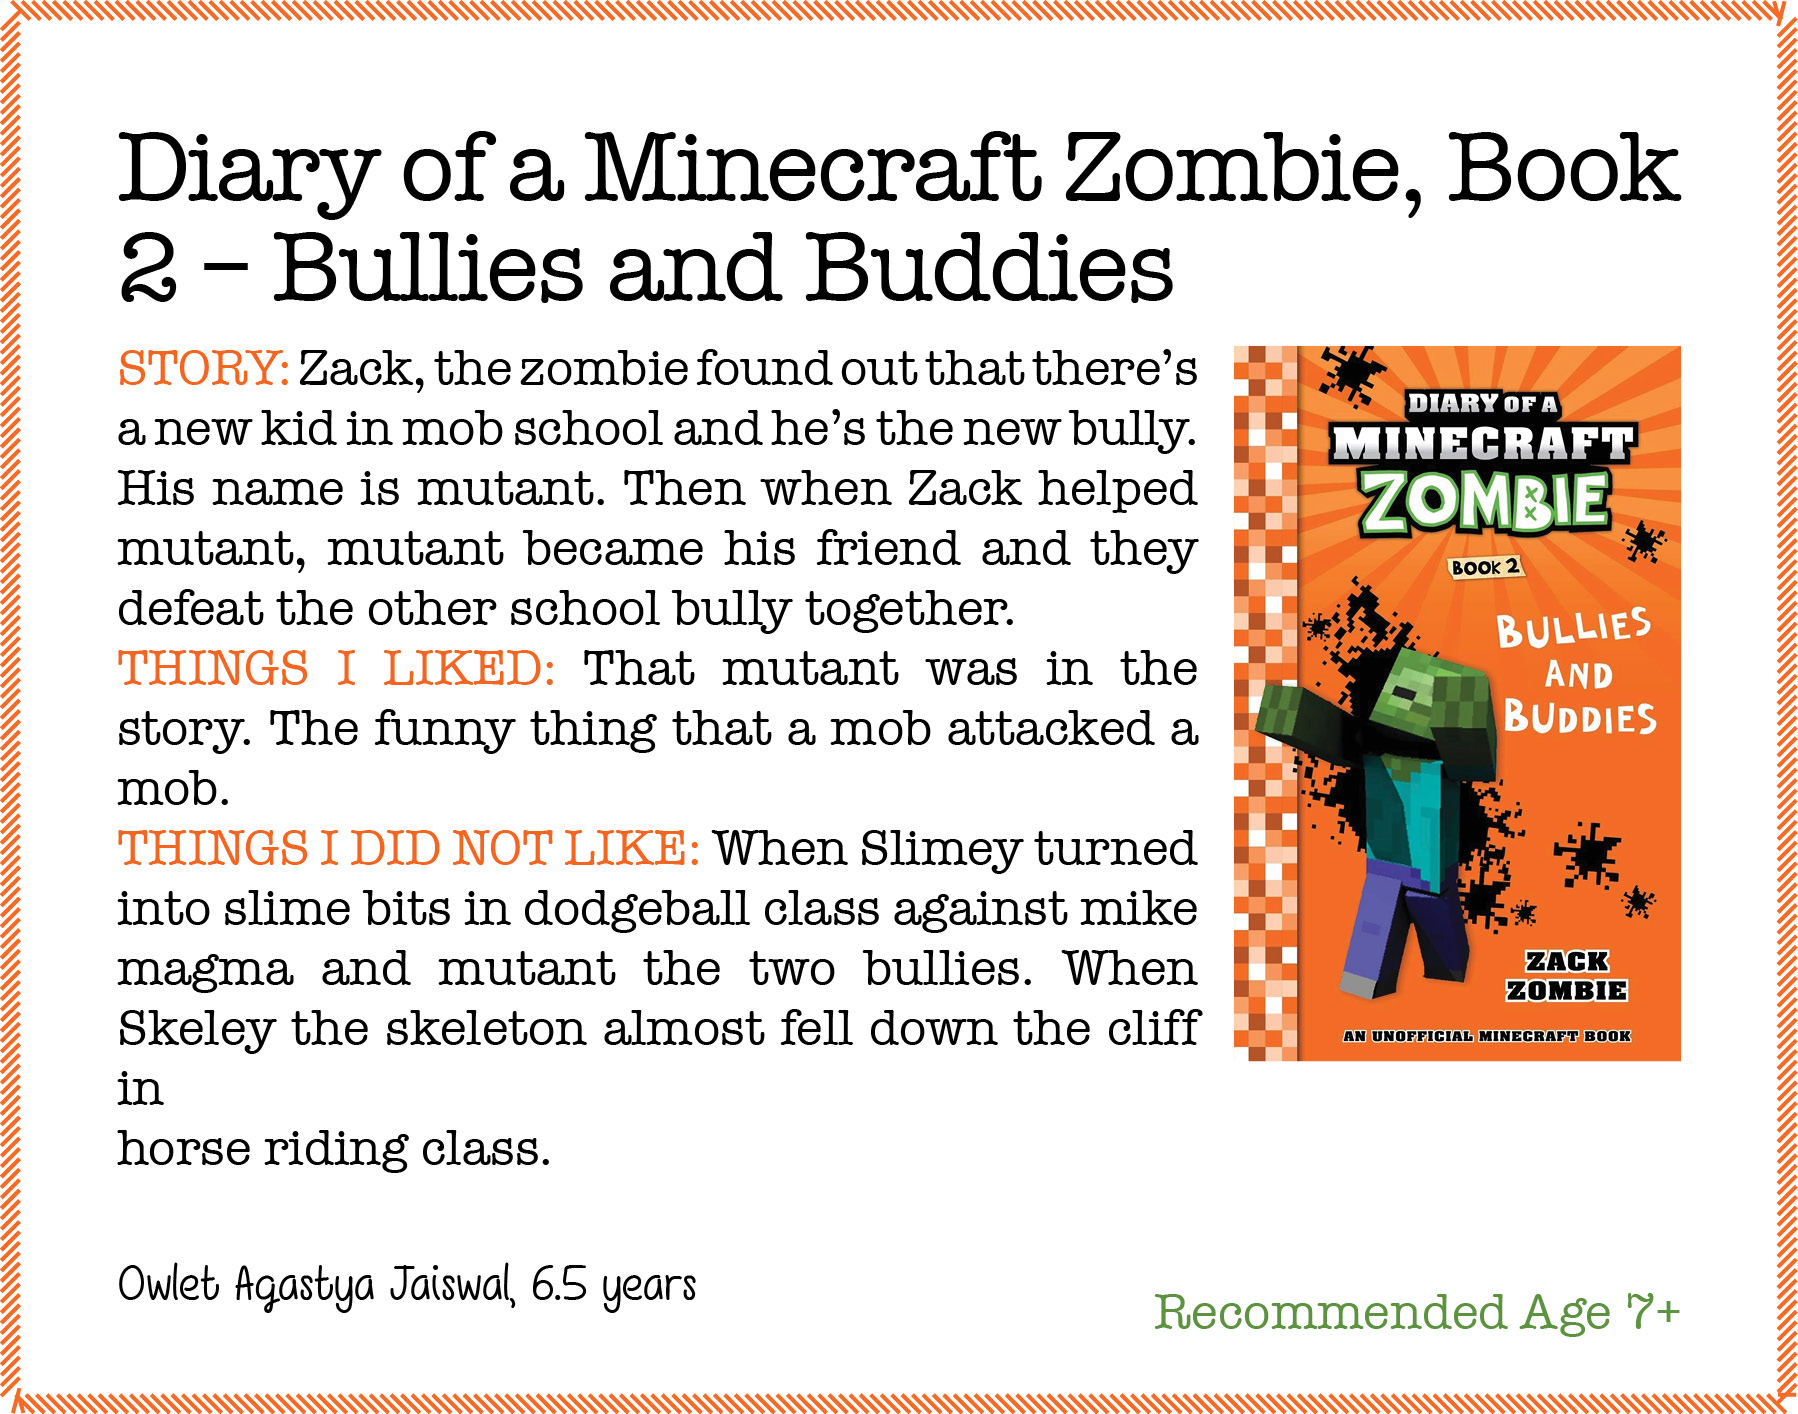 Diary of a Minecraft Zombie, Book 2 – Bullies and Buddies